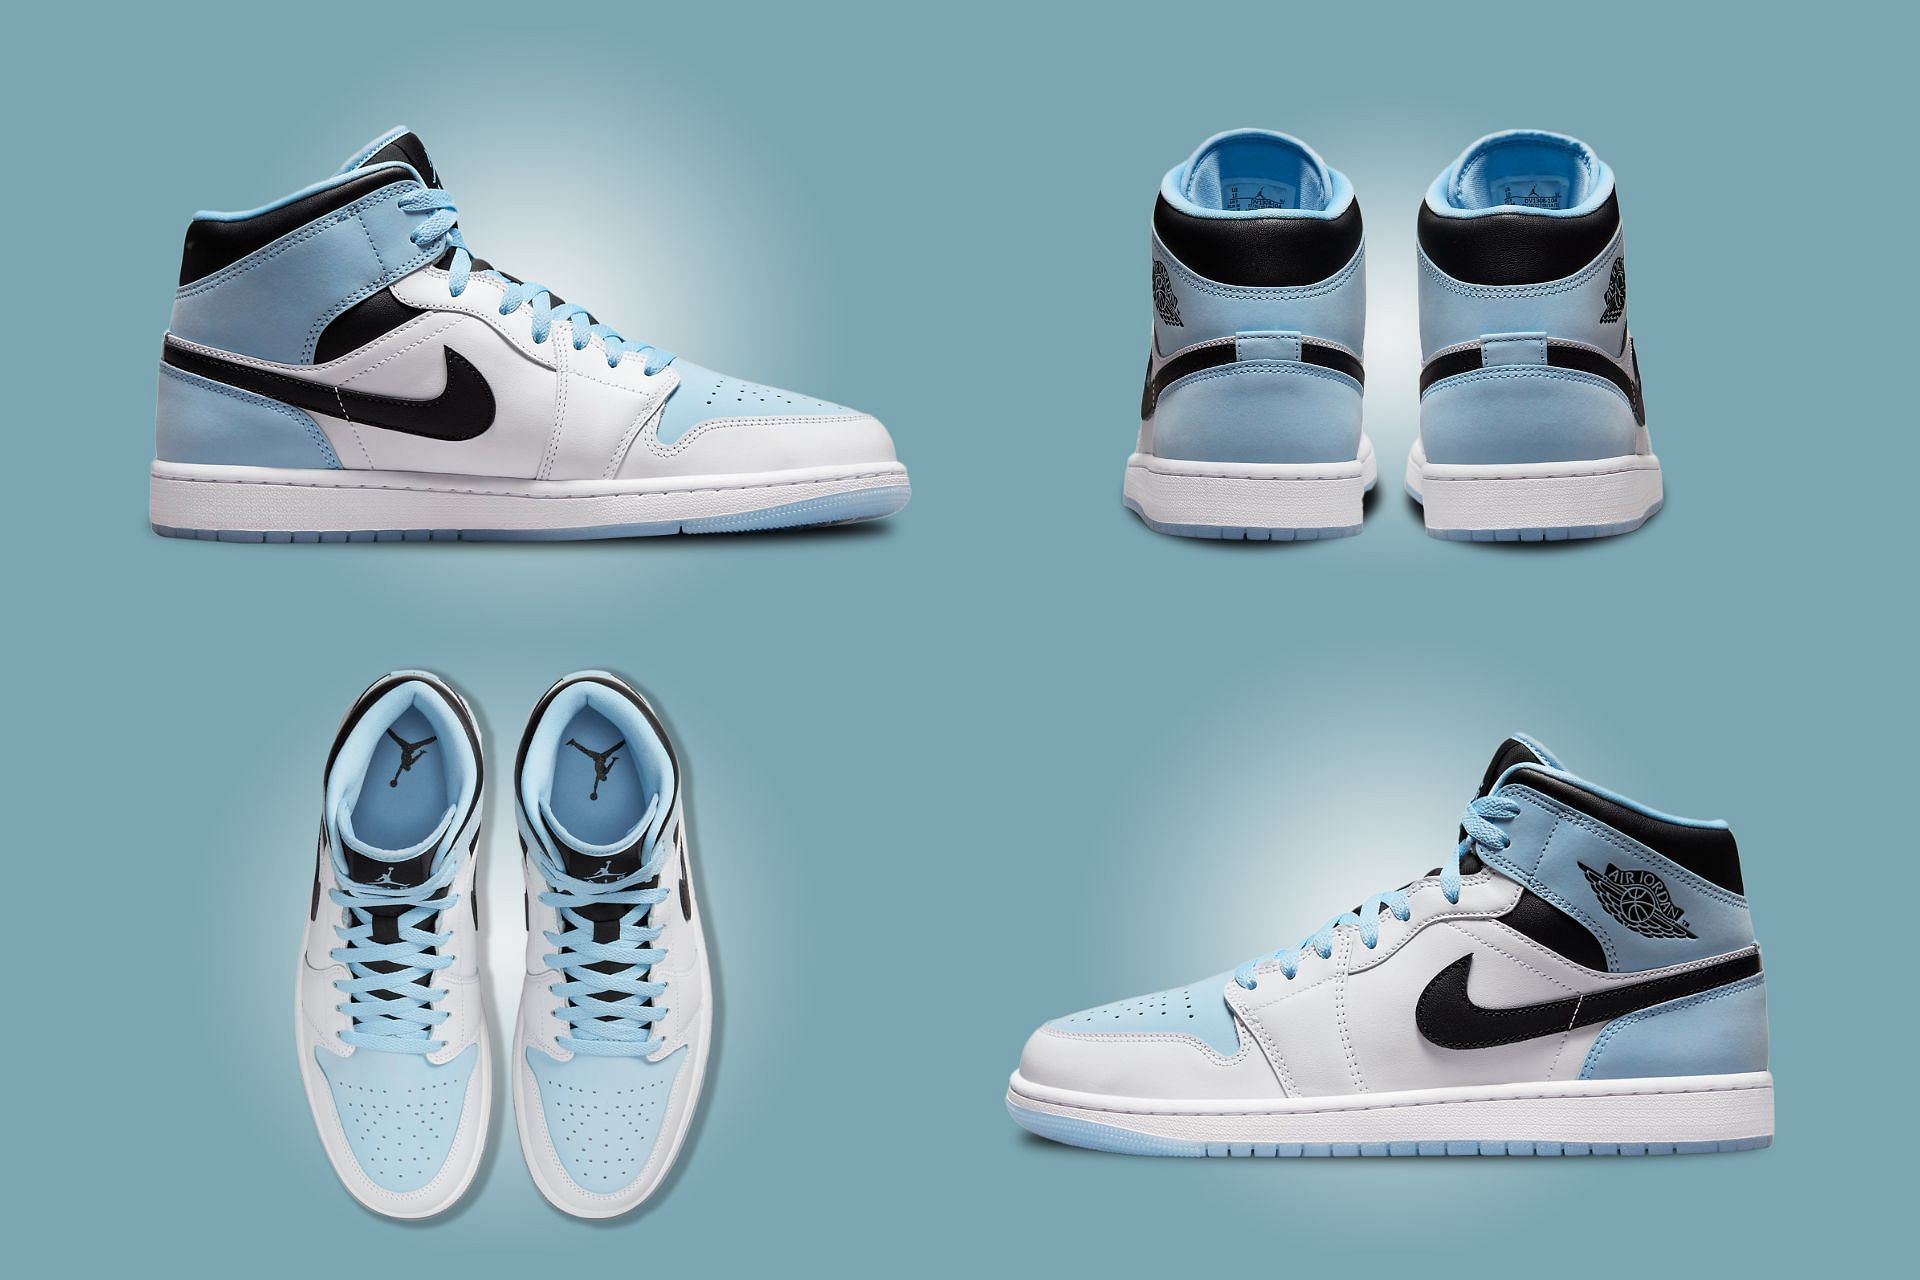 The upcoming Nike Air Jordan 1 Mid SE &quot;Ice Blue&quot; sneakers come clad in shades of blue, black and white, (Image via Sportskeeda)